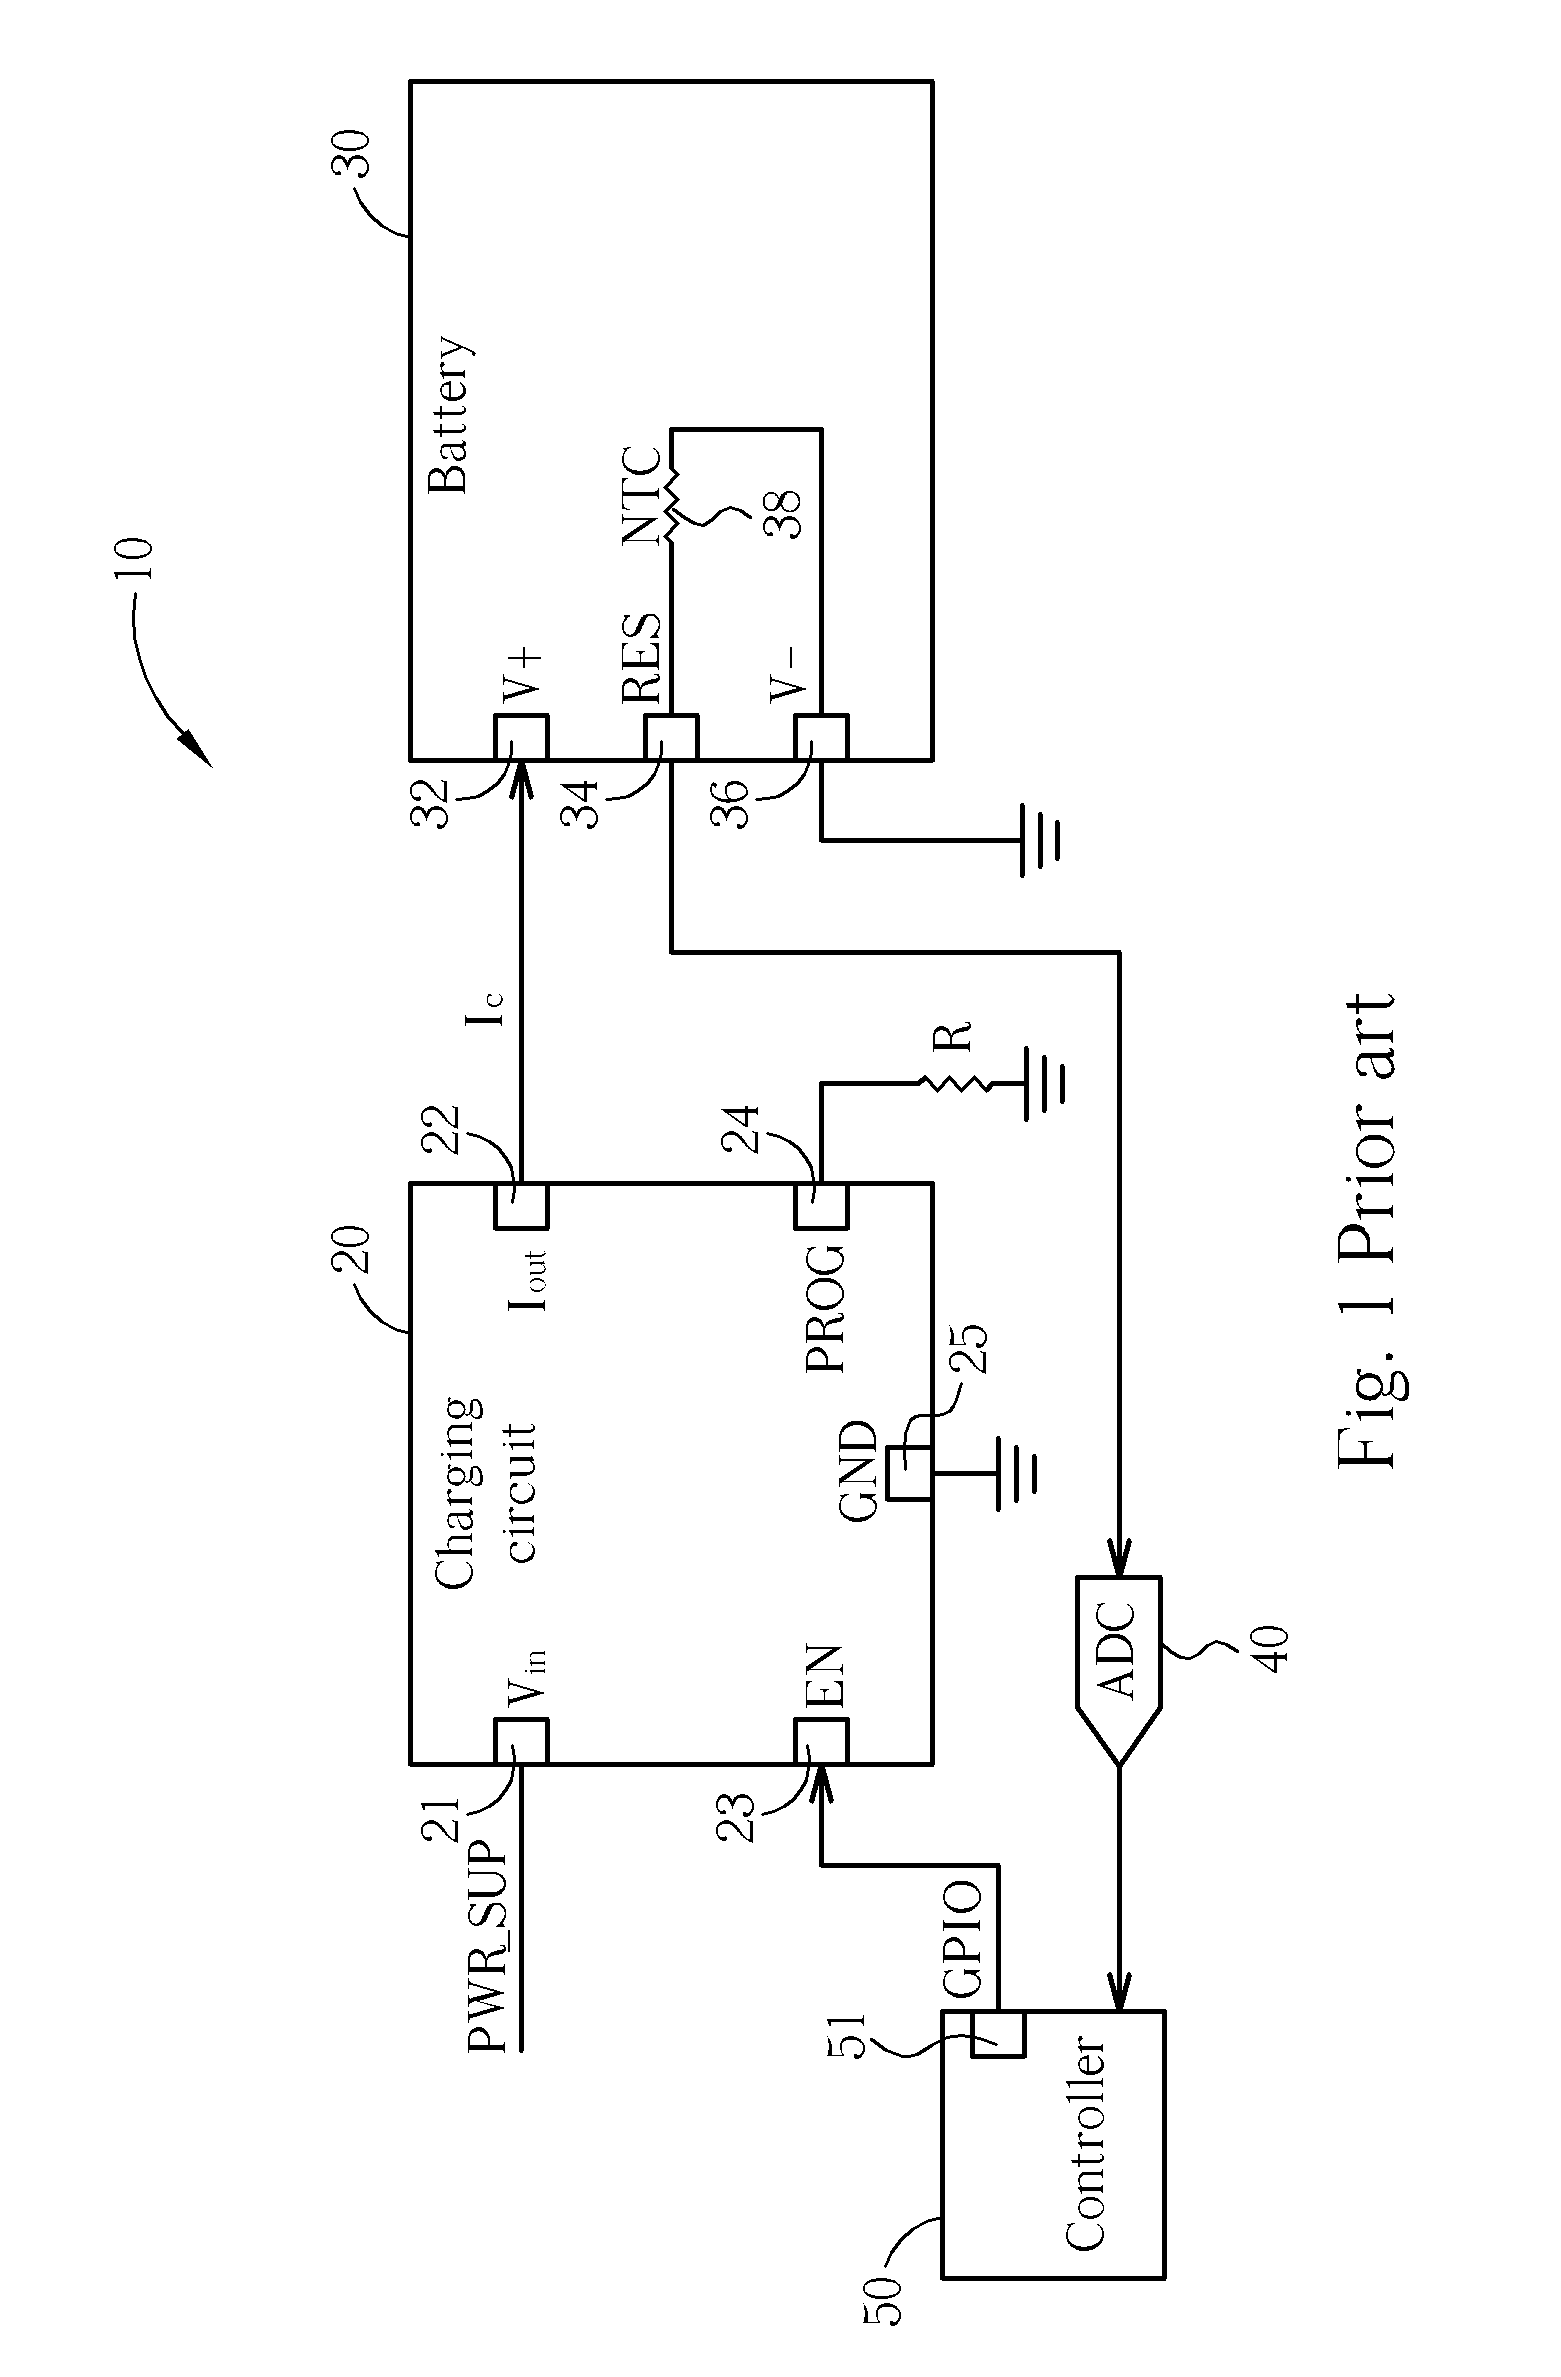 Battery charging system and related method for preventing overheating while charging